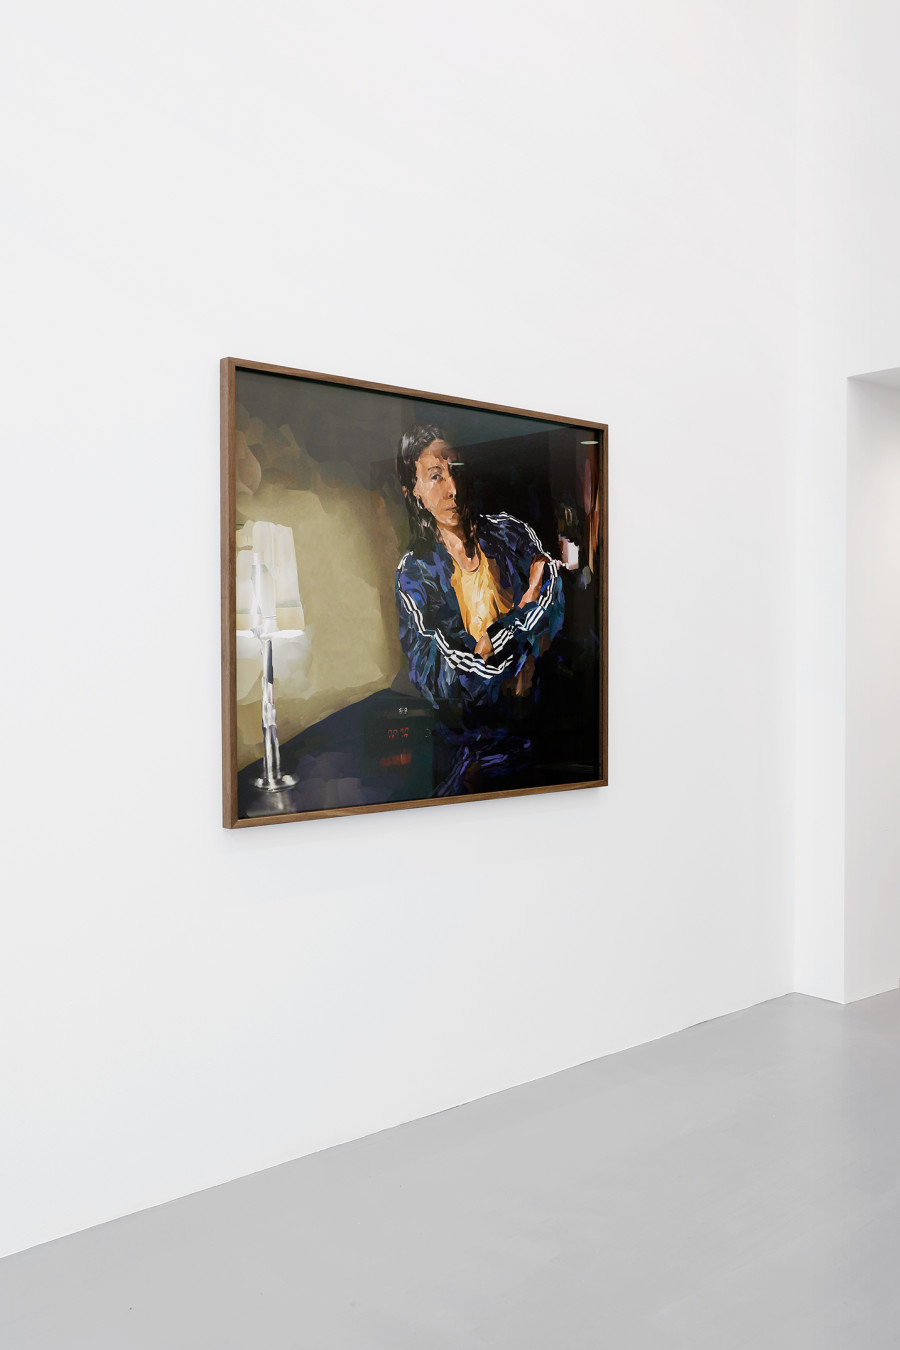 Exhibition View Alina Frieske Solo Show «Can you see me better now?» view on Alina Frieske, In Absence (One), 2020, Archival print on baryta paper, 115 x 140 cm, Edition of 3 + 2 AP at Fabienne Levy, Lausanne, 2021 / Photo: Neige Sanchez / Courtesy: the Artist and Fabienne Levy